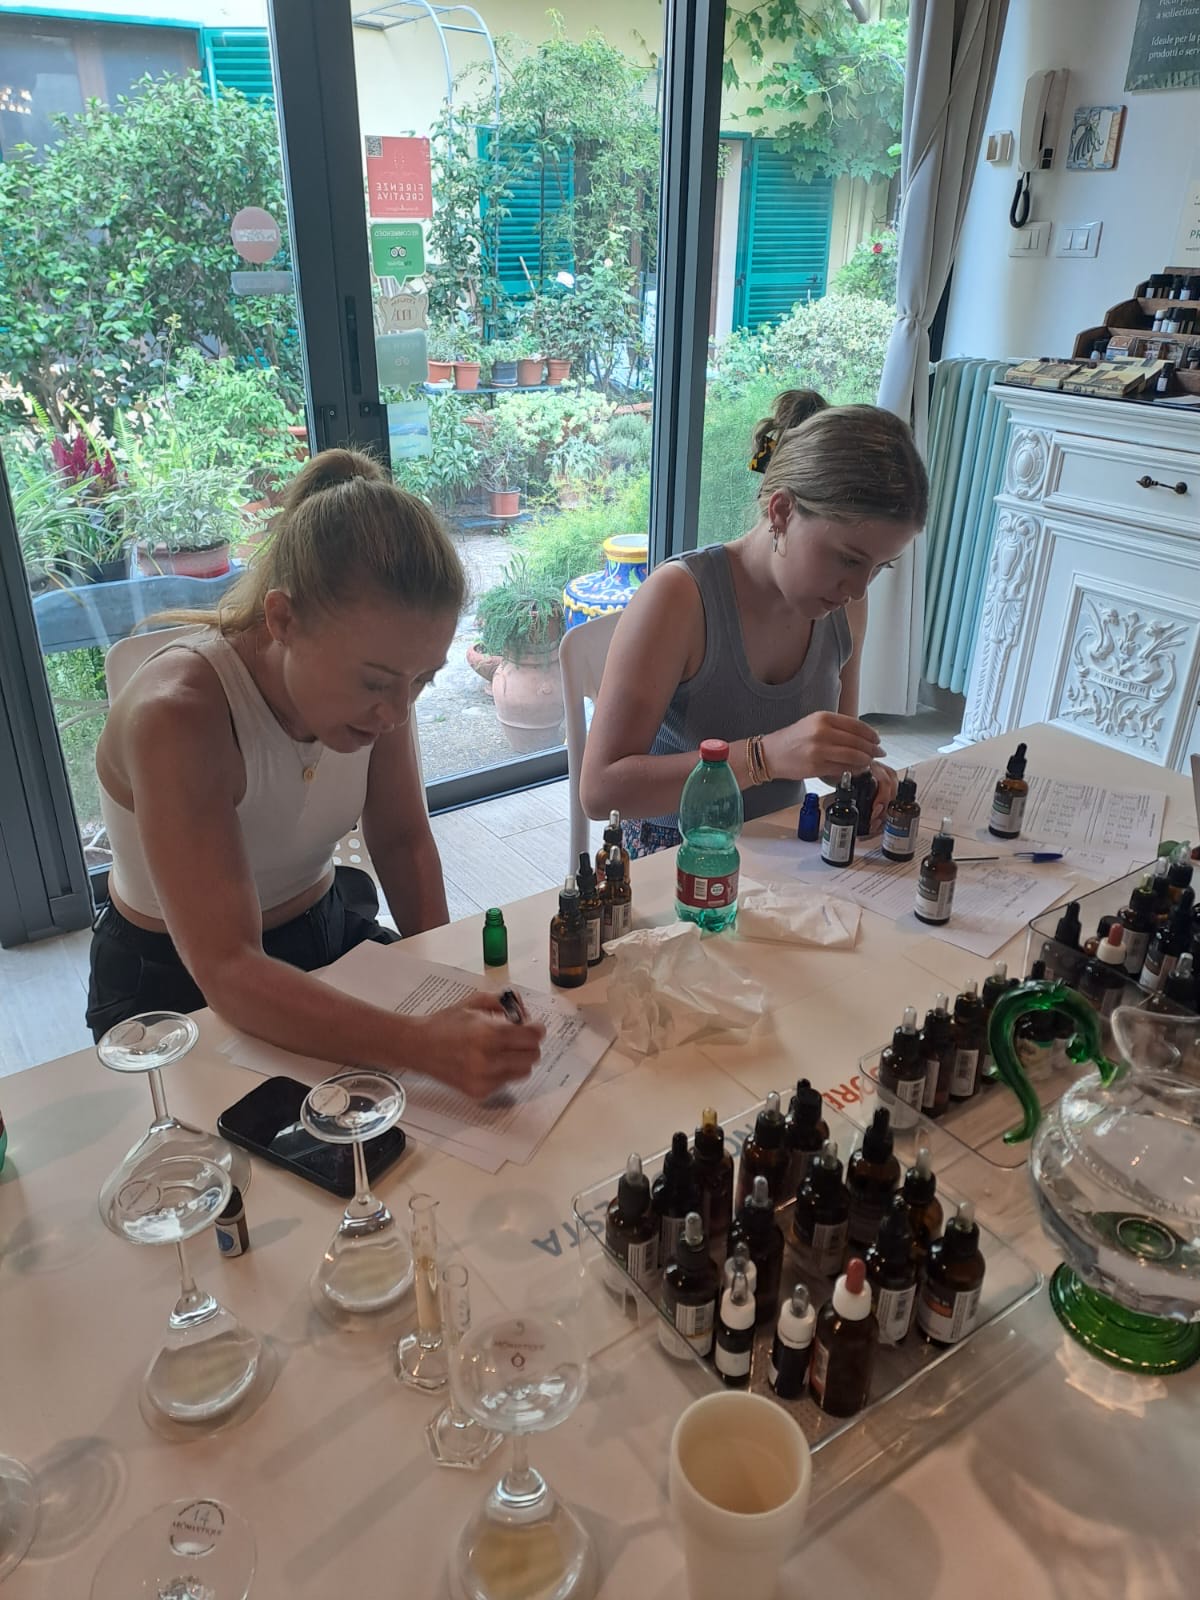 Students focused duting a perfume class in Florence, Italy